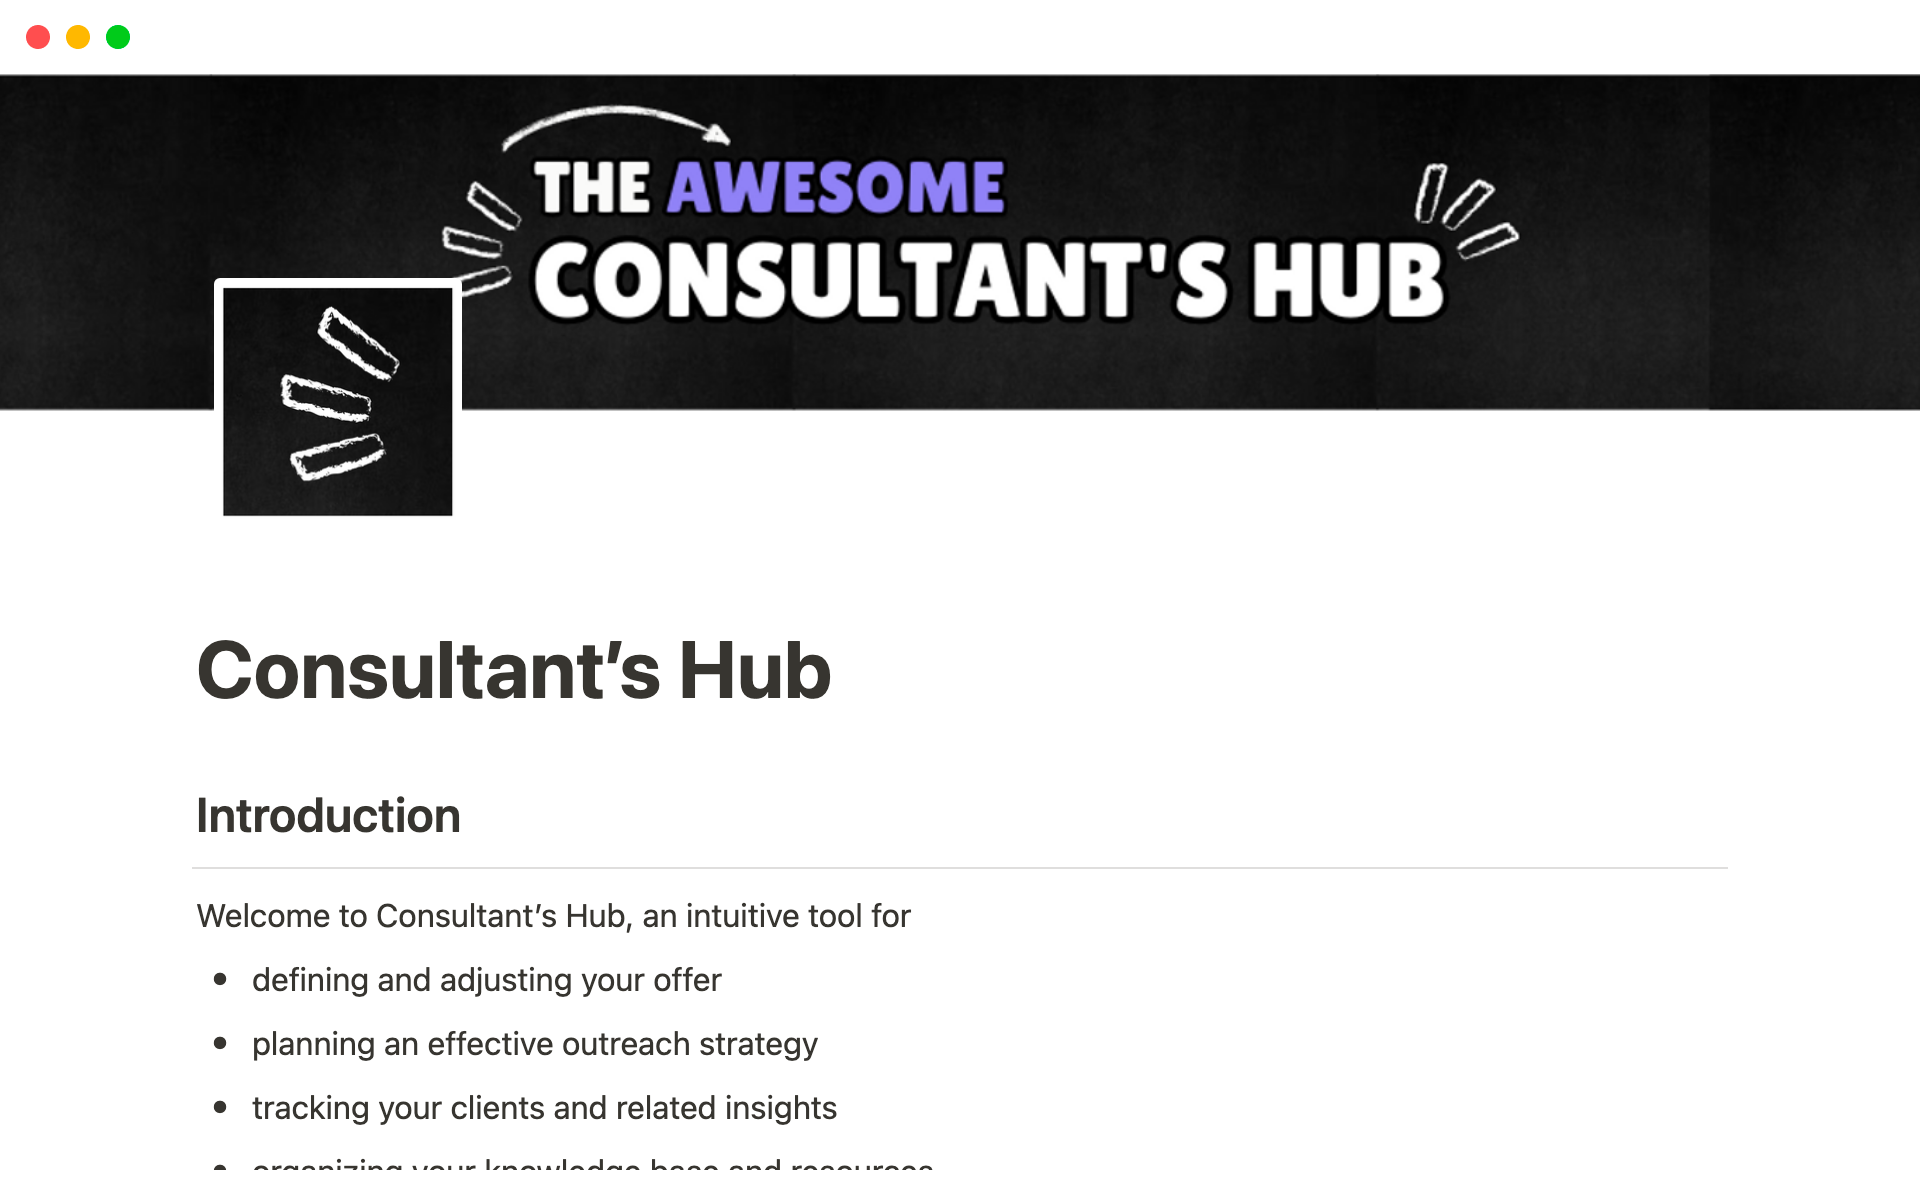 The Consultant's Hub is an all-in-one solution to stay on track with goals and client deliverables, together with a knowledge base, client directory and prompts for effective consultations.